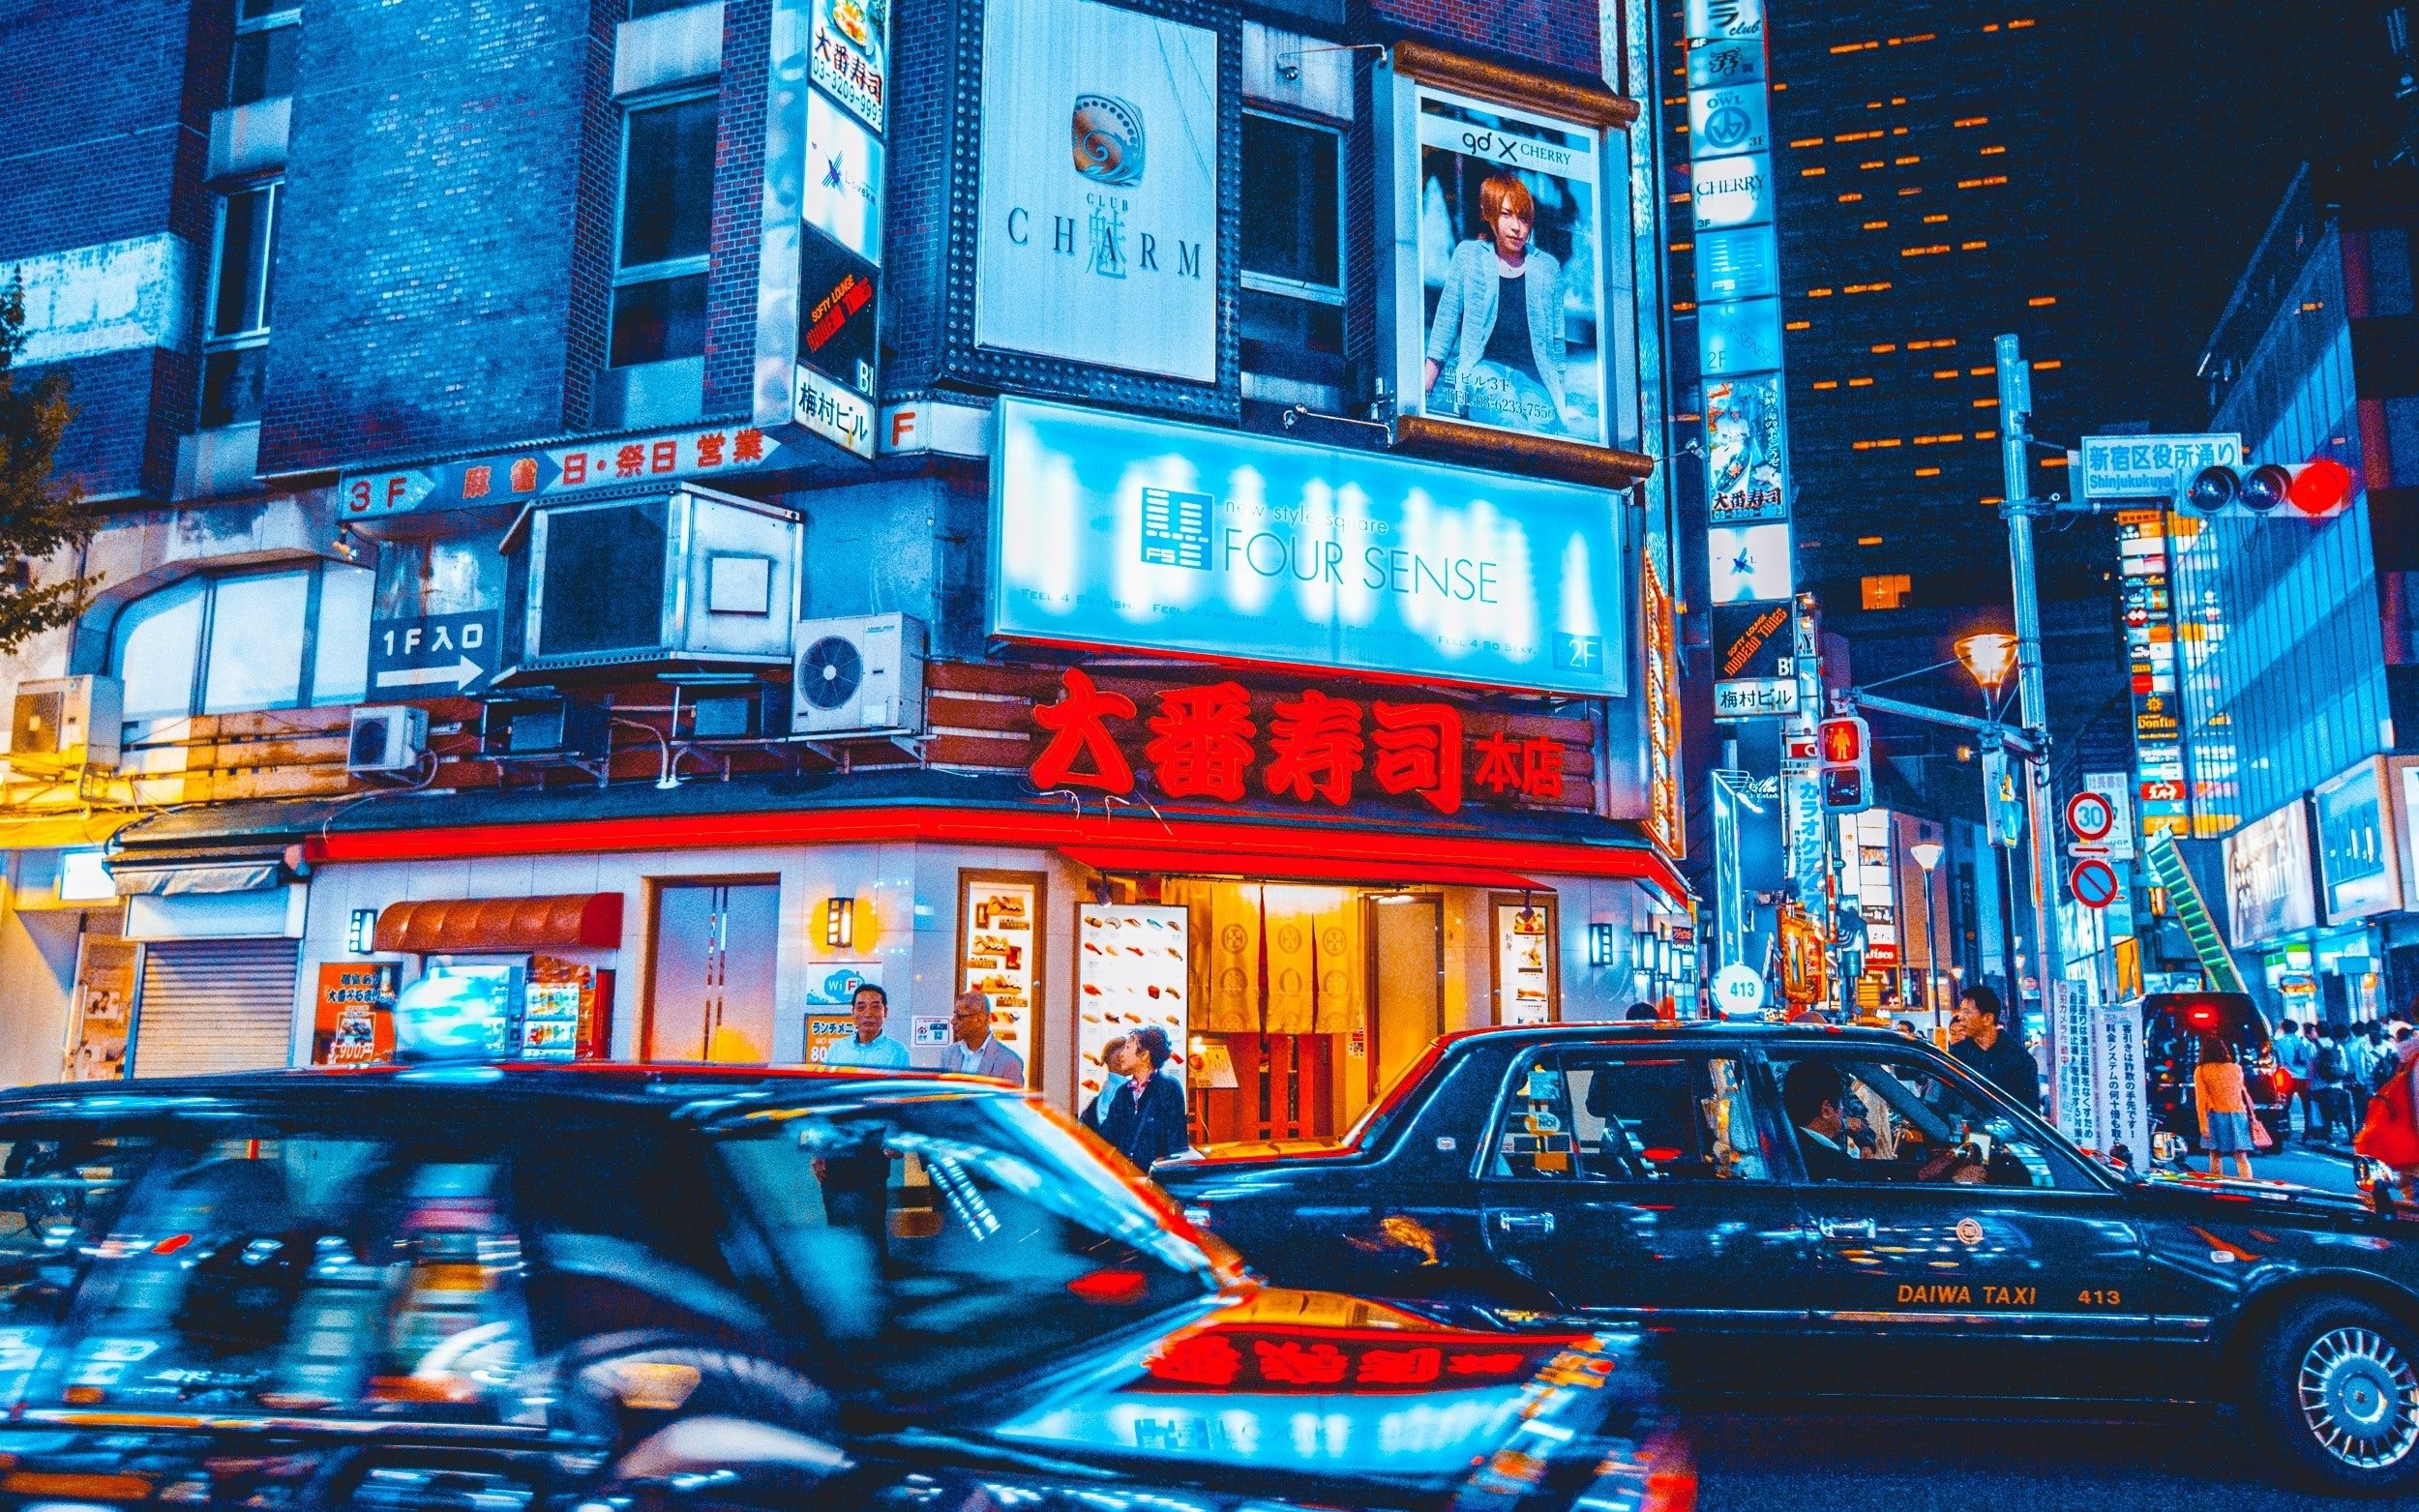 Wallpaper / taxi cabs in a neon soaked street in tokyo, neon soaked tokyo street 4k wallpaper